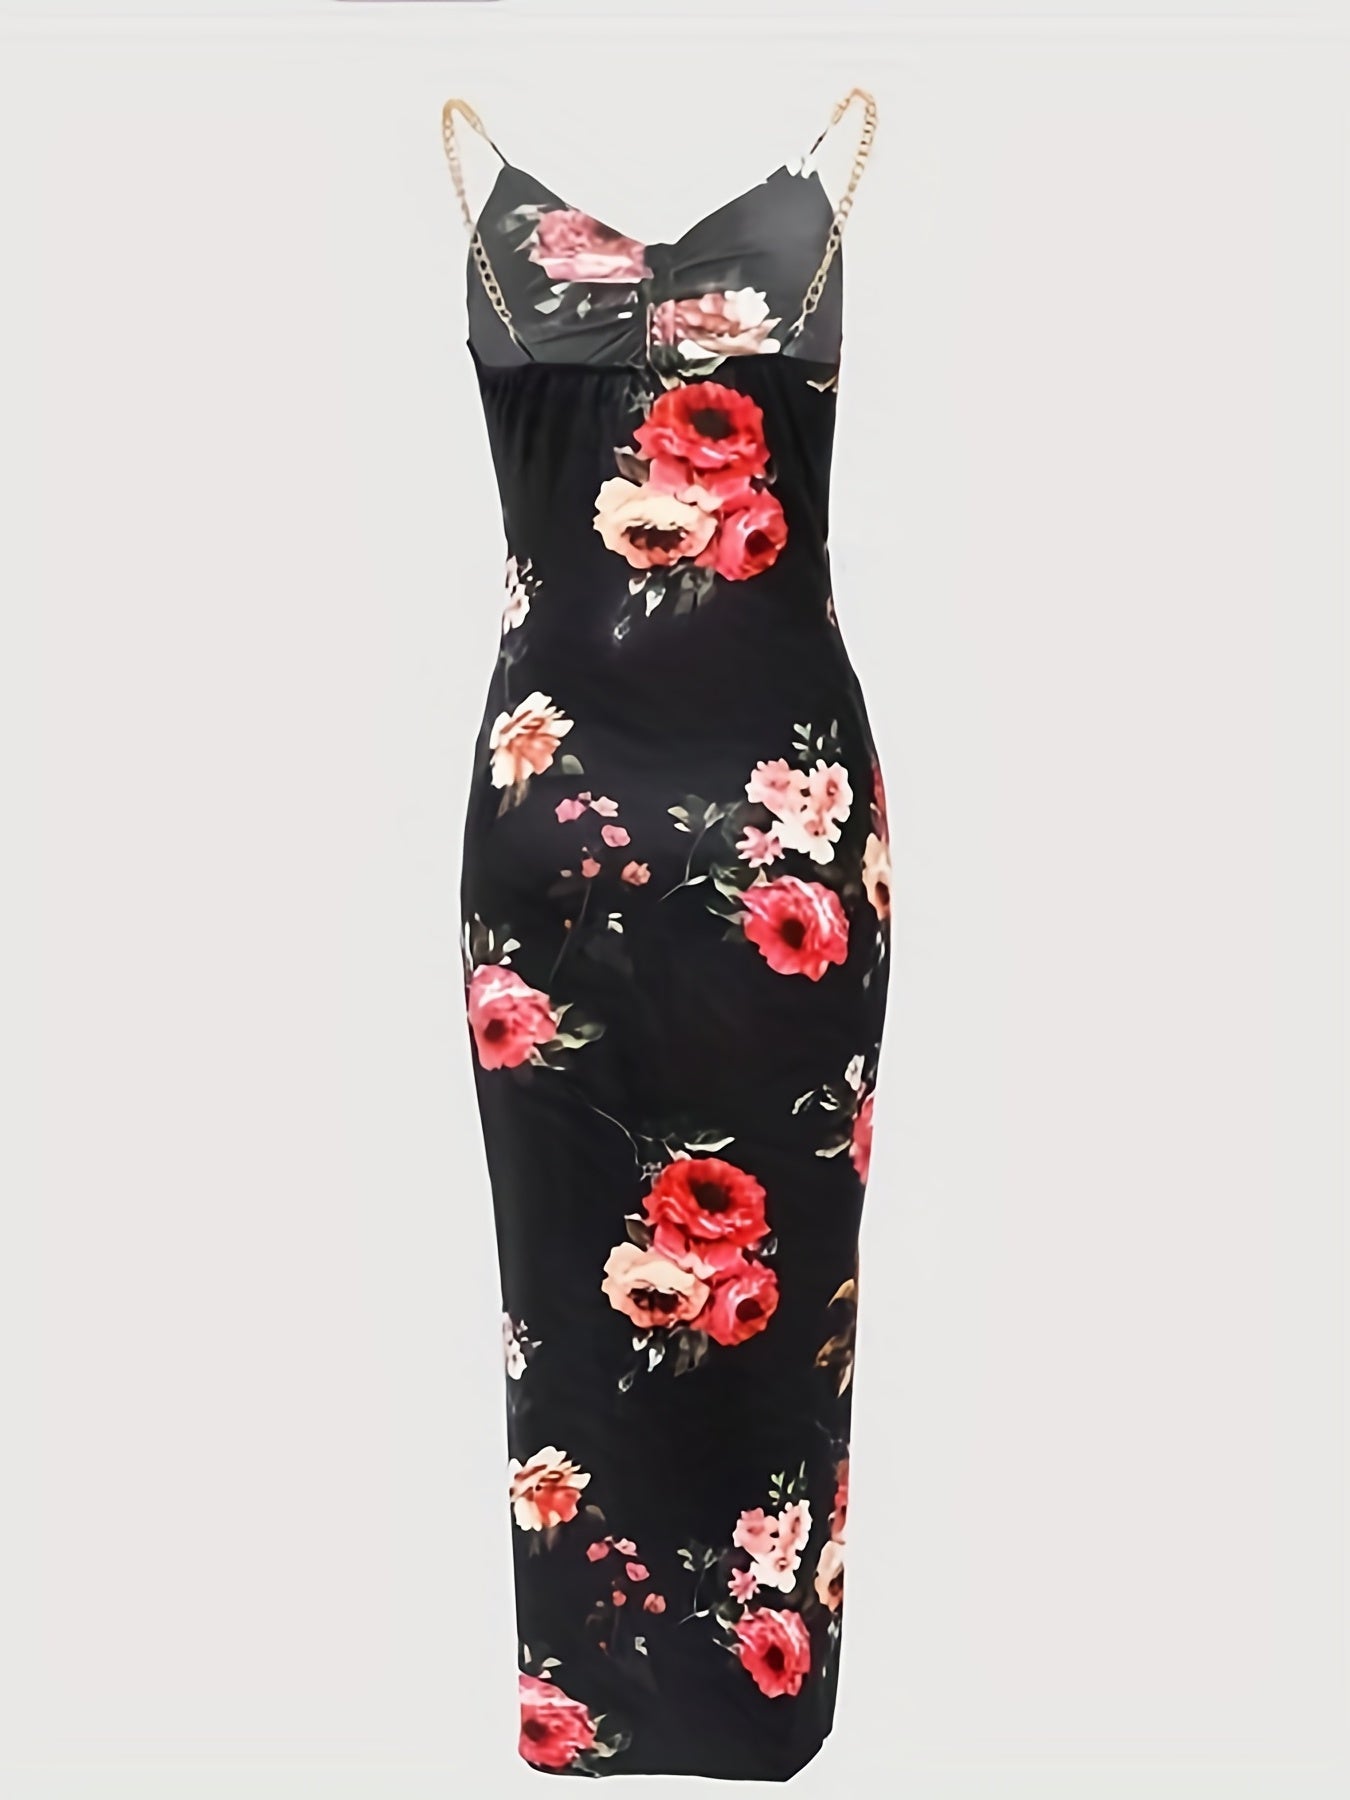 Floral Print Chain Strap Dress, Sexy Cut Out Sleeveless Bodycon Dress, Women's Clothing